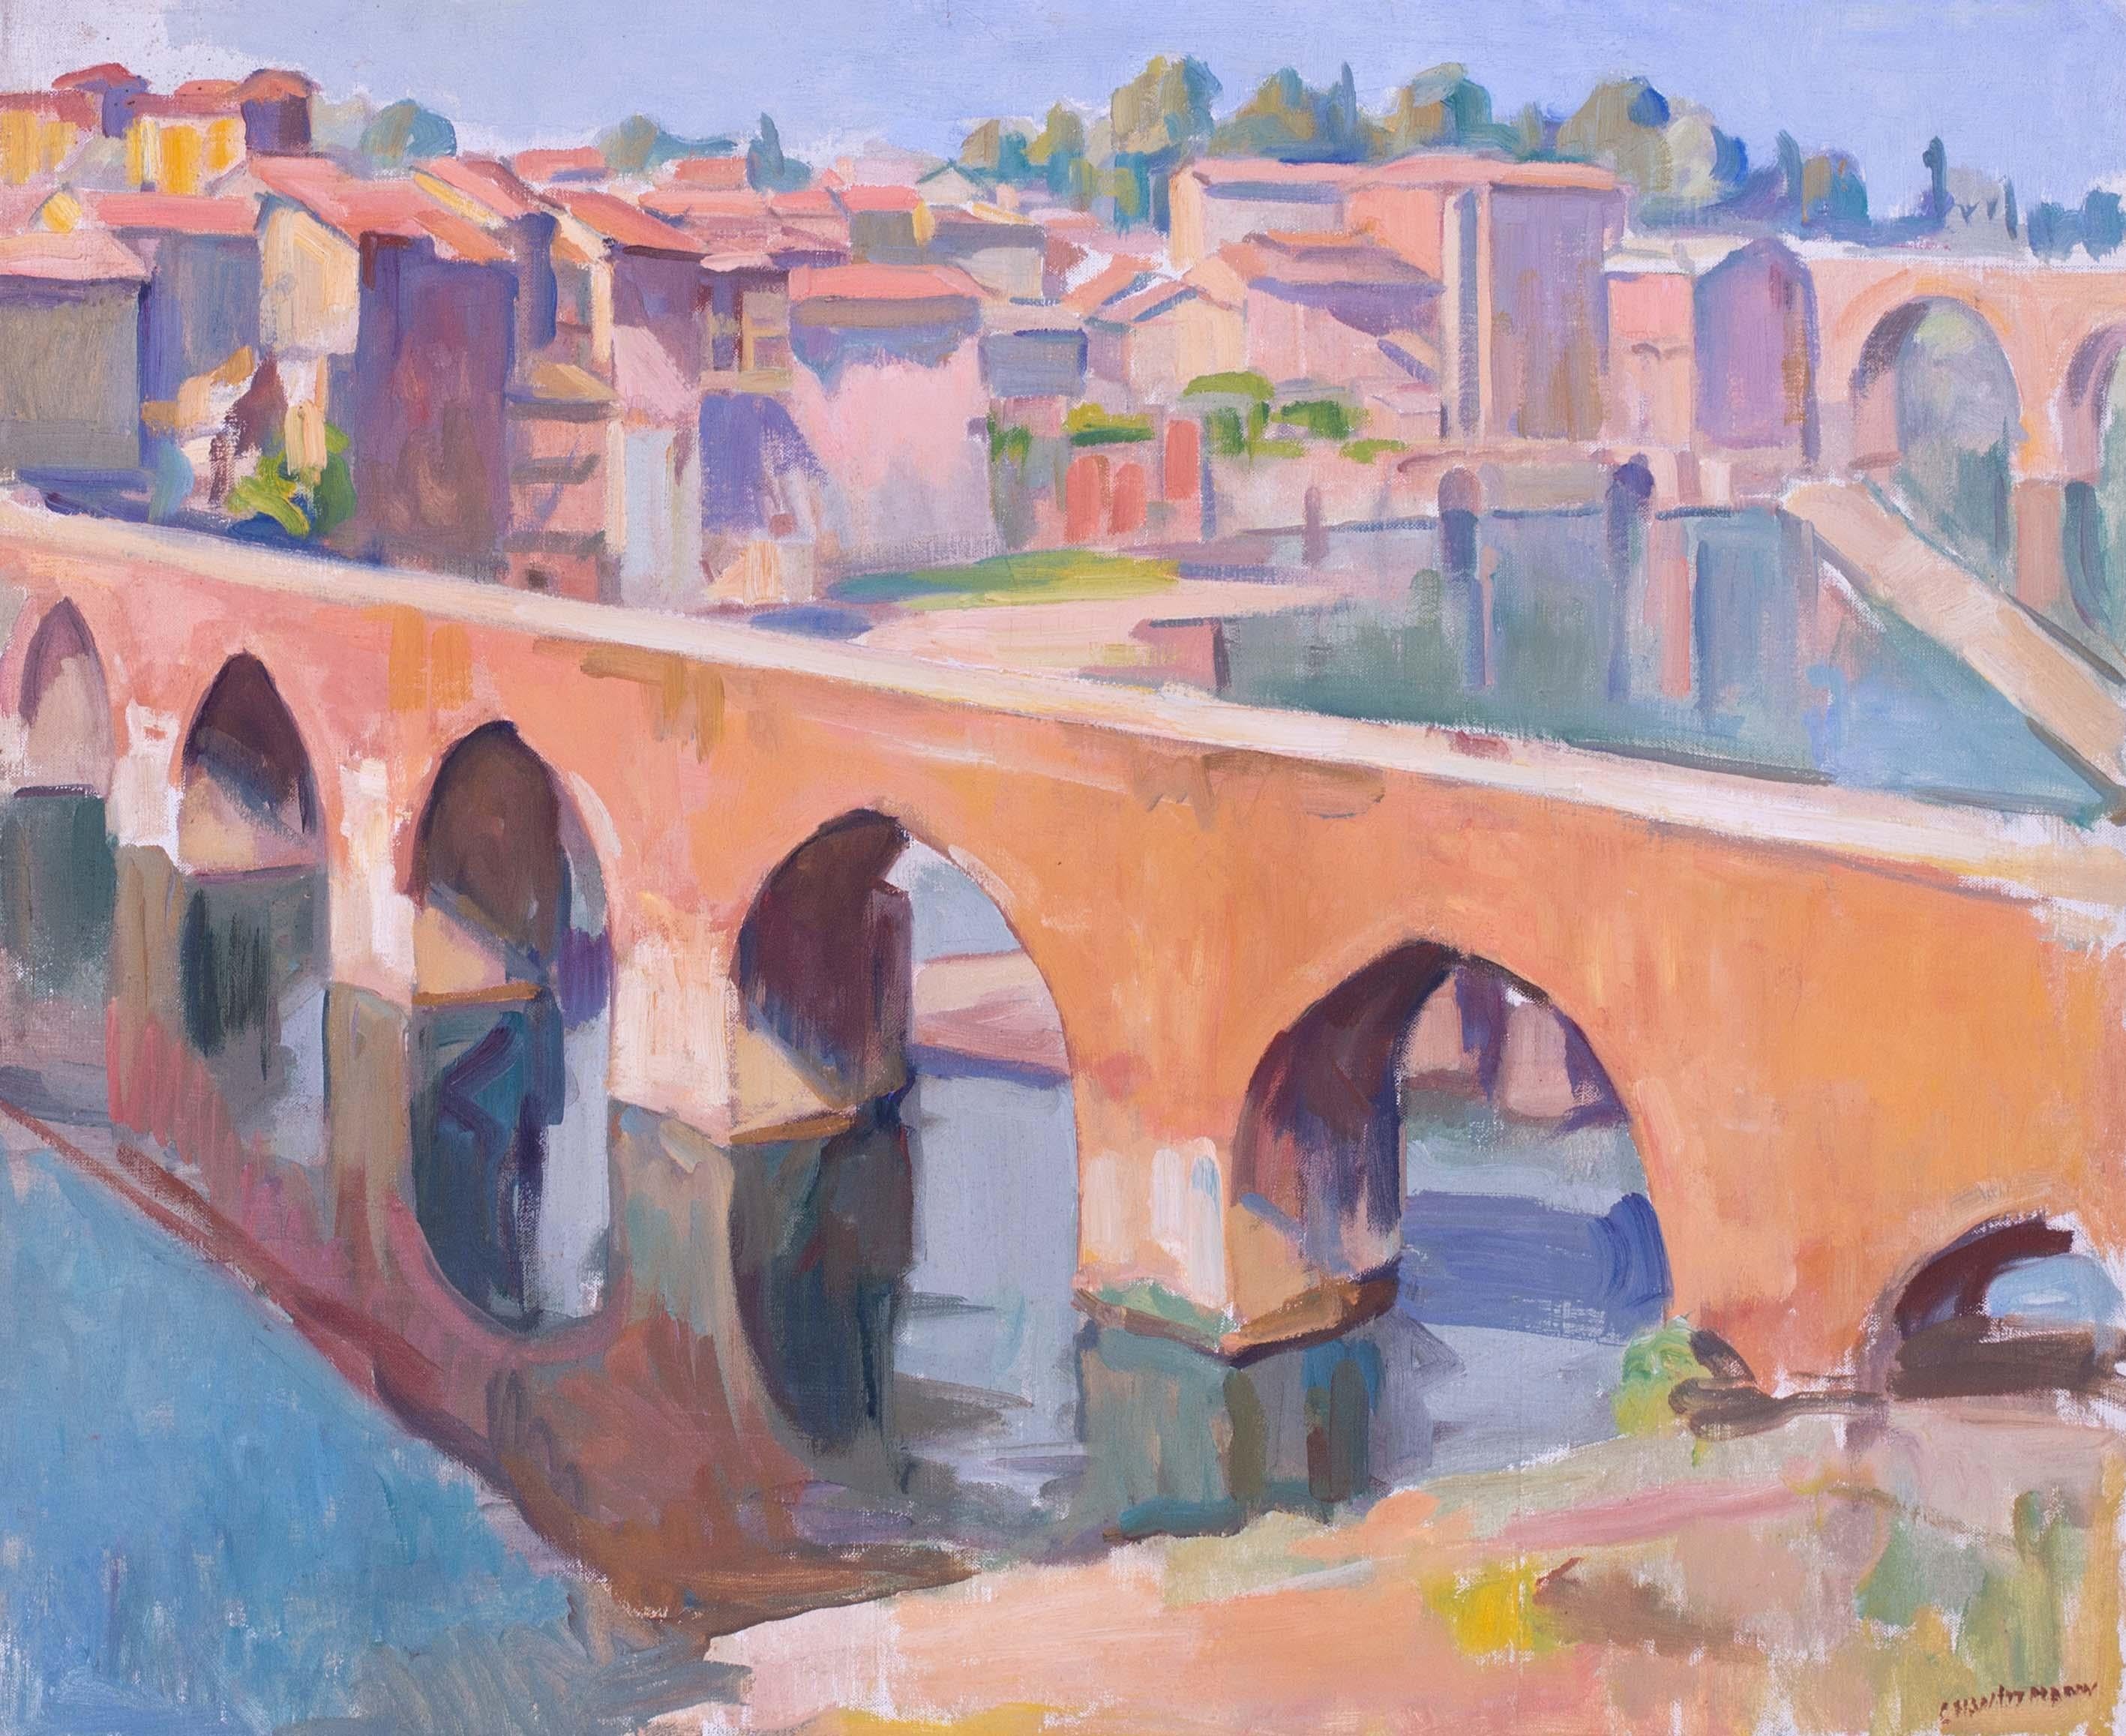 French Post Impressionist painting of the bridge at Albi, France by Wittmann - Painting by Charles Wittmann